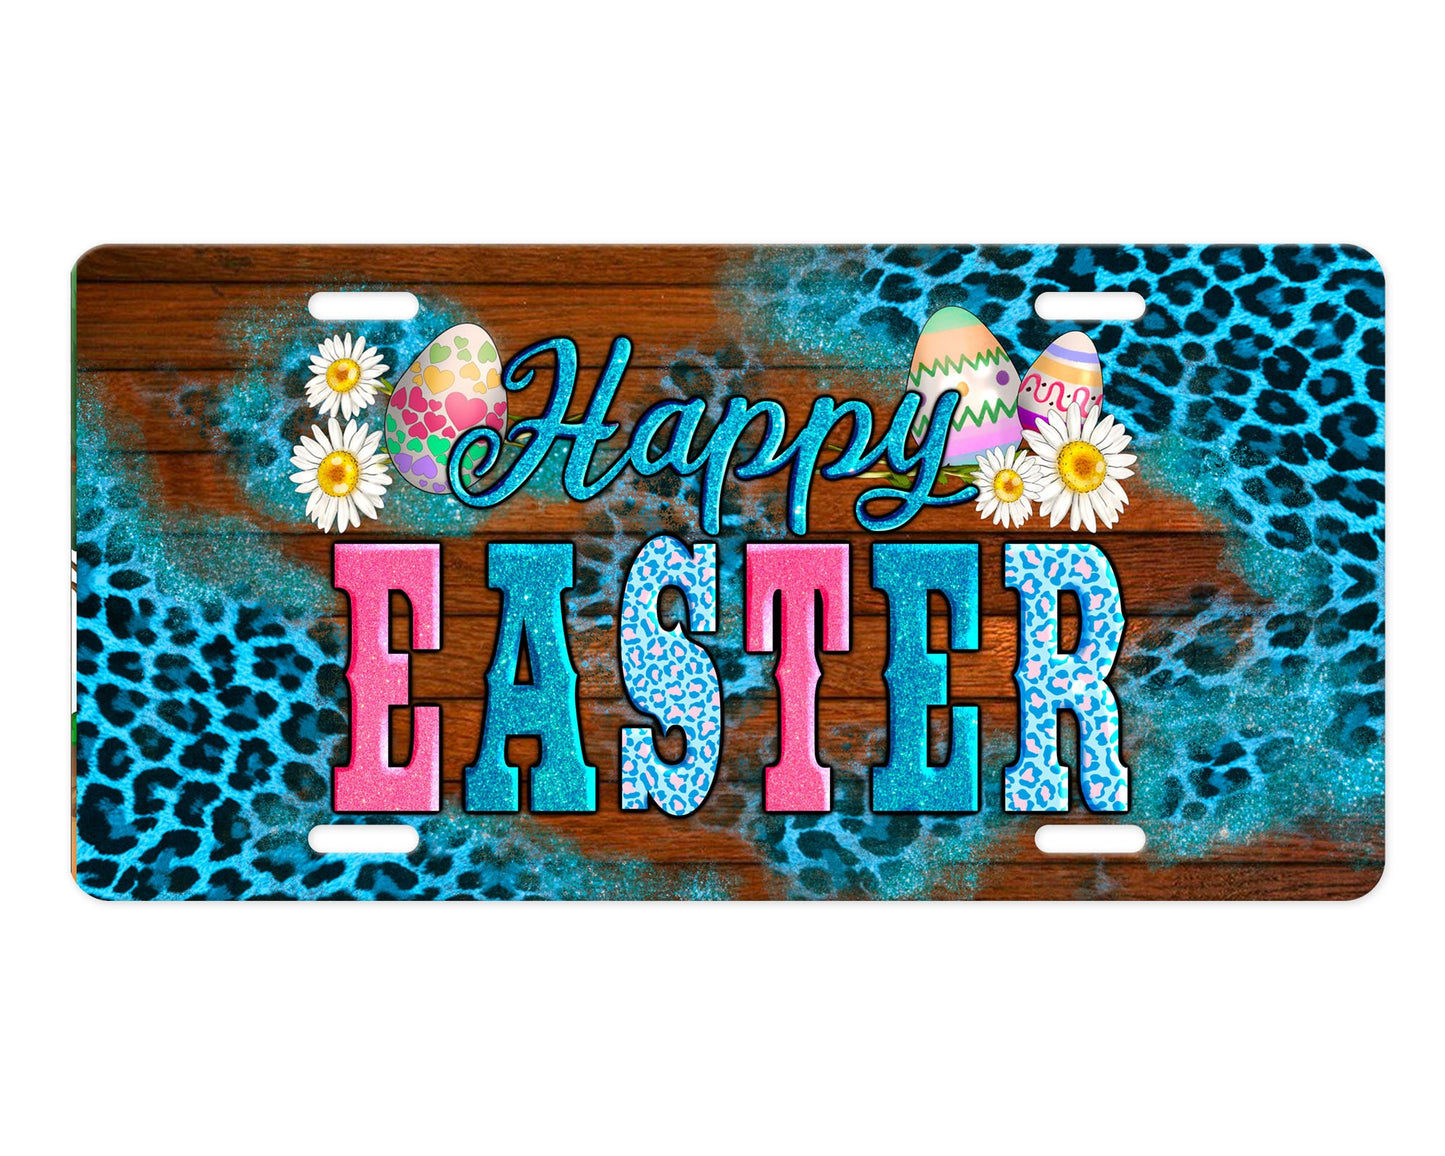 Happy Easter Western Aluminum Vanity License Plate Car Accessory Decorative Front Plate